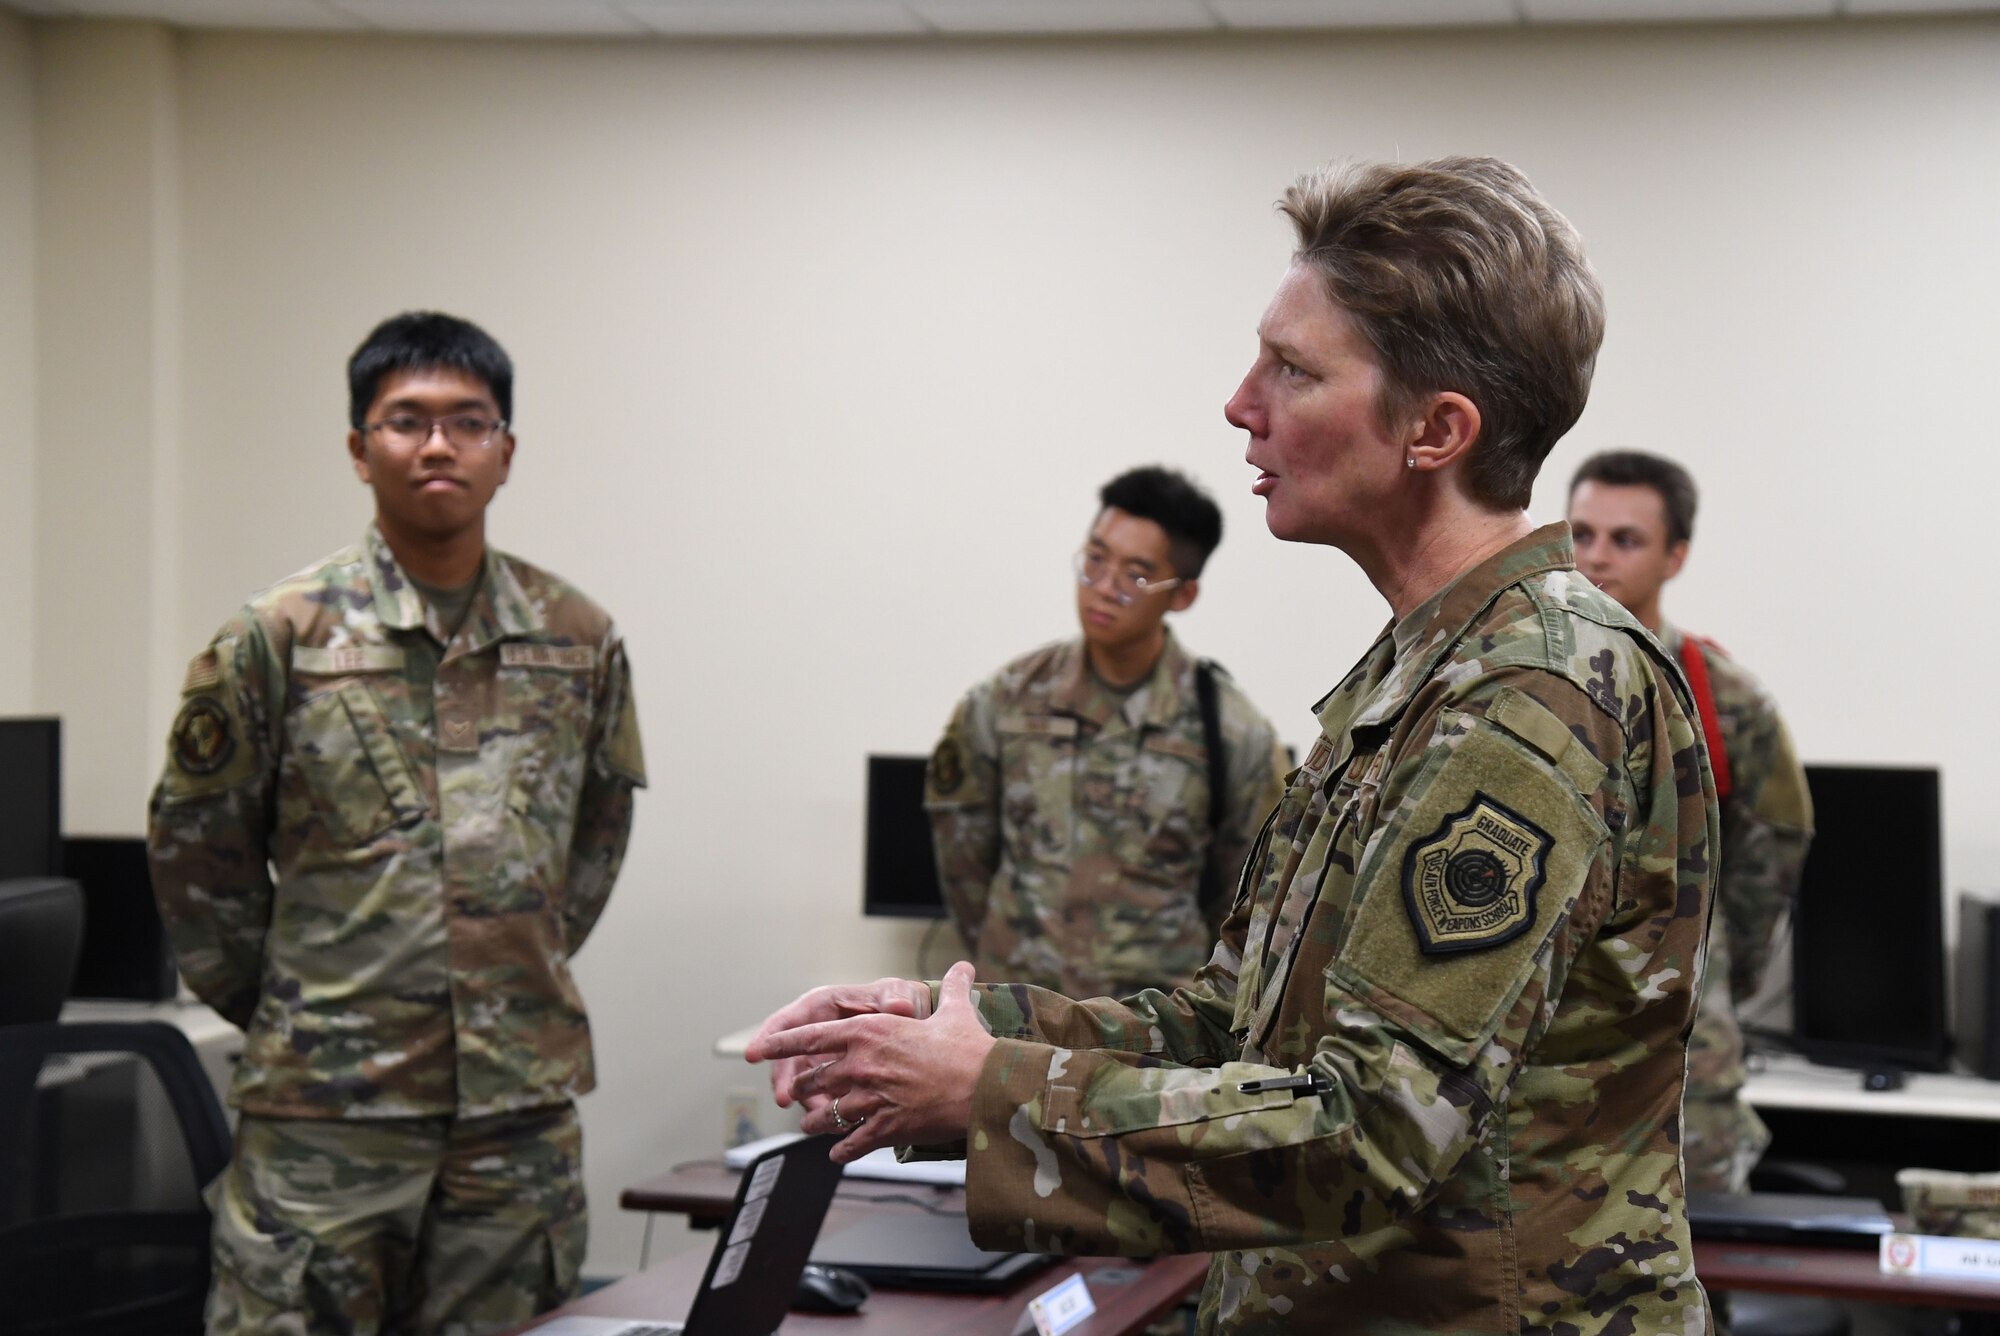 U.S. Air Force Lt. Gen. Leah Lauderback, Deputy Chief of Staff for Intelligence, Surveillance, Reconnaissance and Cyber Effects Operations, Headquarters U.S. Air Force, the Pentagon, Arlington, Virginia, speaks with 336th Training Squadron Airmen in Thomson Hall at Keesler Air Force Base, Mississippi, August 15, 2022. Lauderback and her team toured the 333rd Training Squadron and 336th Training Squadron to meet and greet squadron personnel, understand the squadron's mission and be briefed on new innovations. (U.S. Air Force photo by Kemberly Groue)